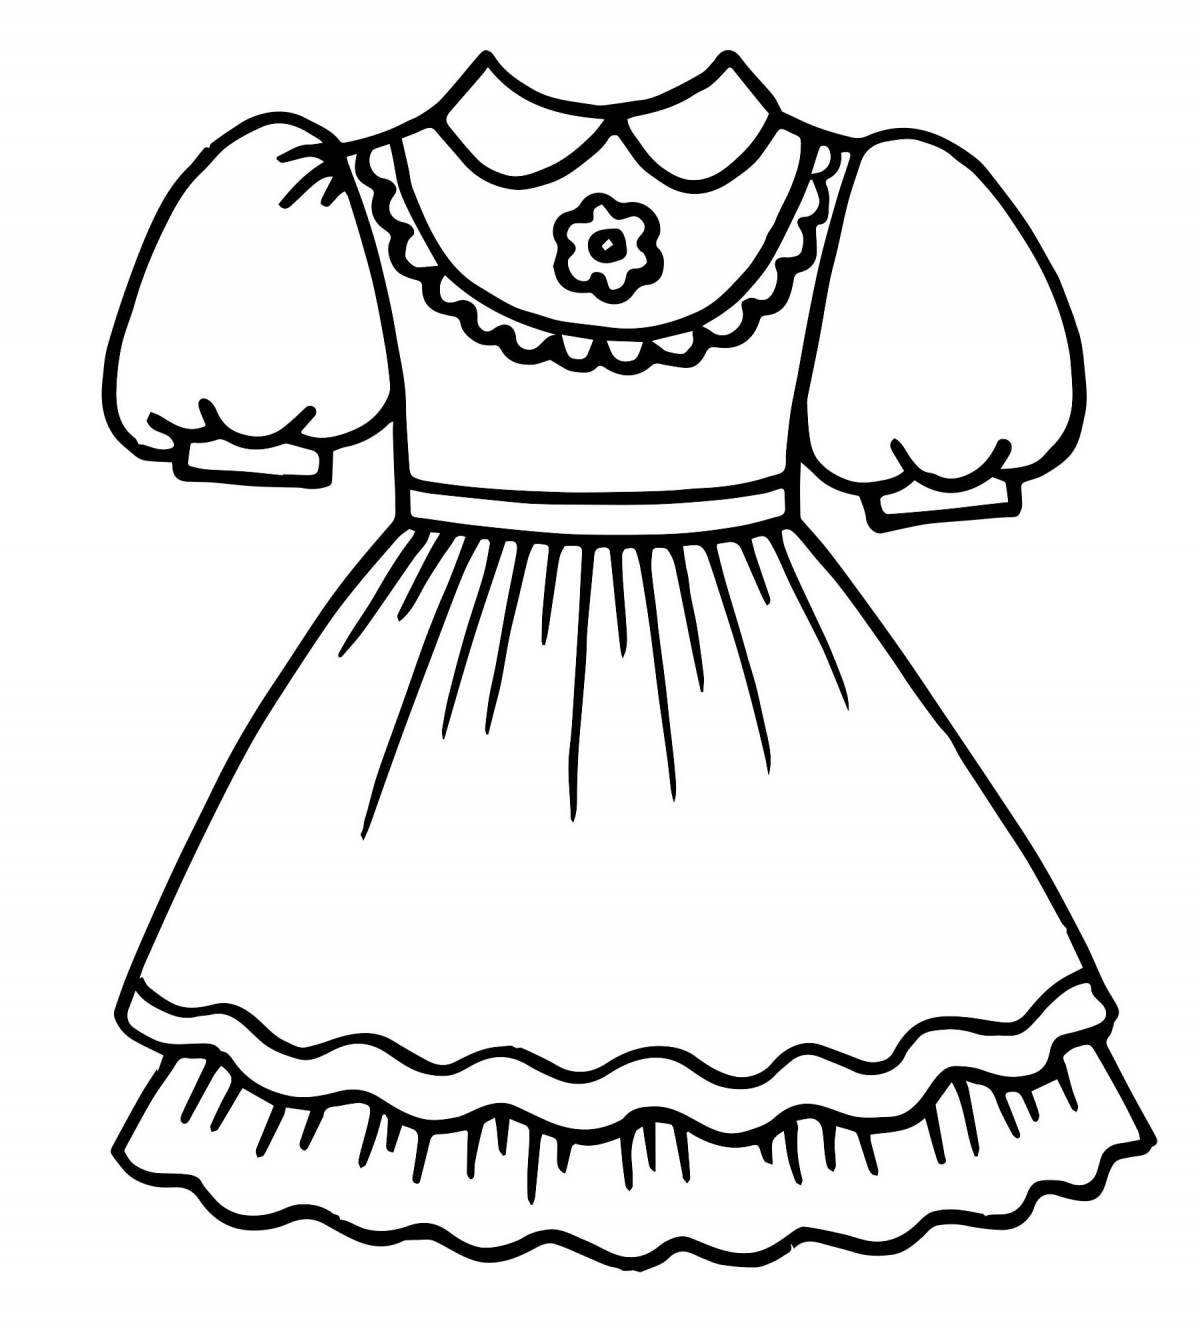 Colorful coloring dress for 5-6 year olds